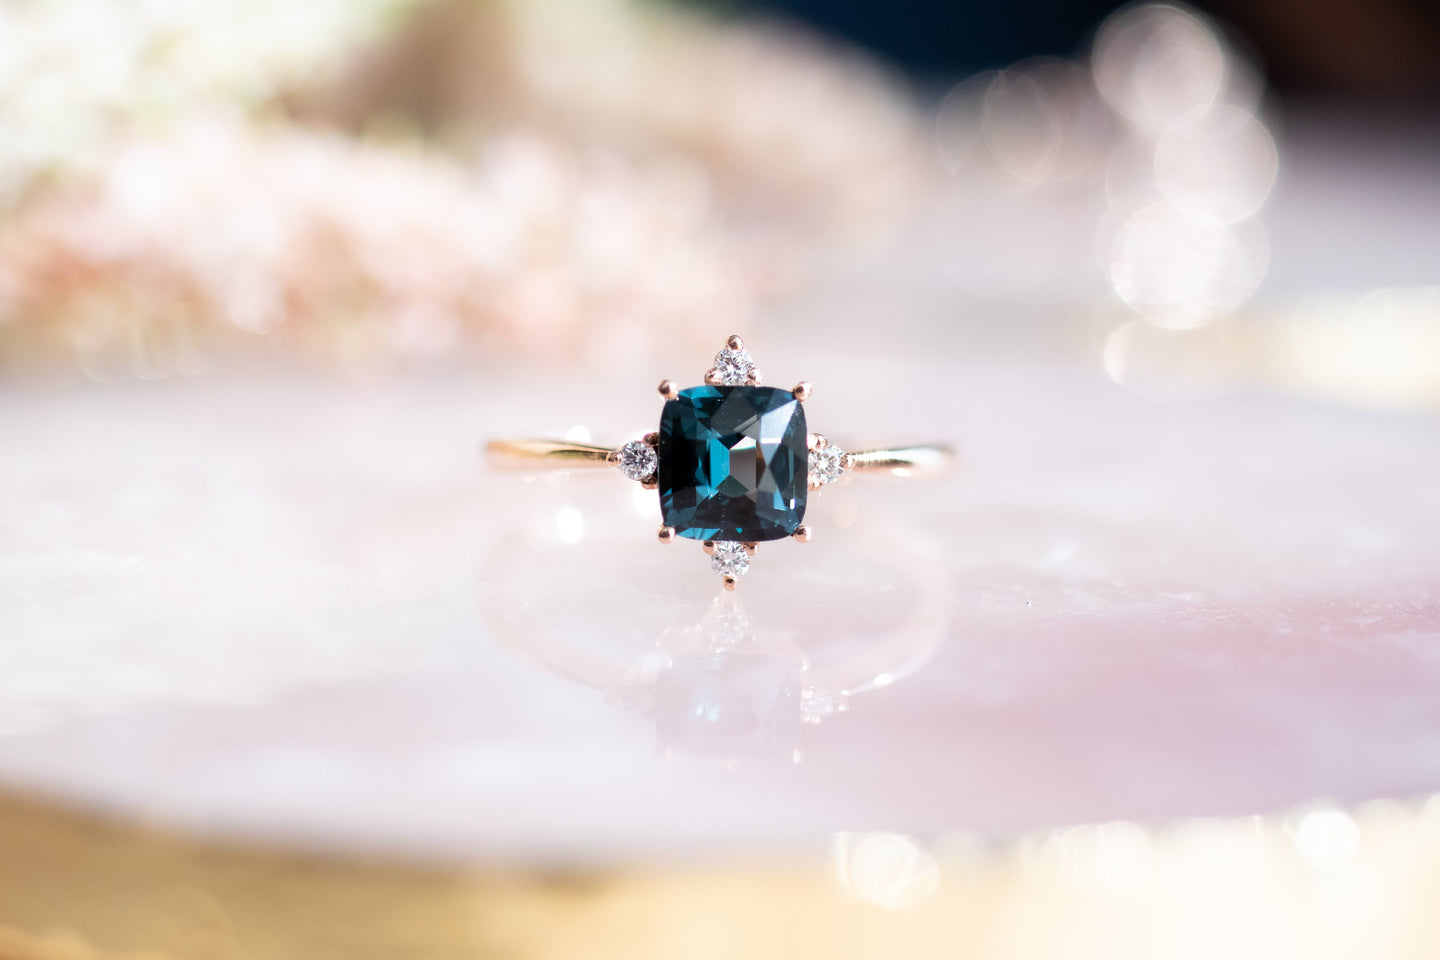 Our selected gemstones, Unheated Sapphire and Spinel, are in brilliant colors and stunning cuts, colored gemstones offer an element of distinction to classic jewelry rings, necklaces, bracelets, earrings.